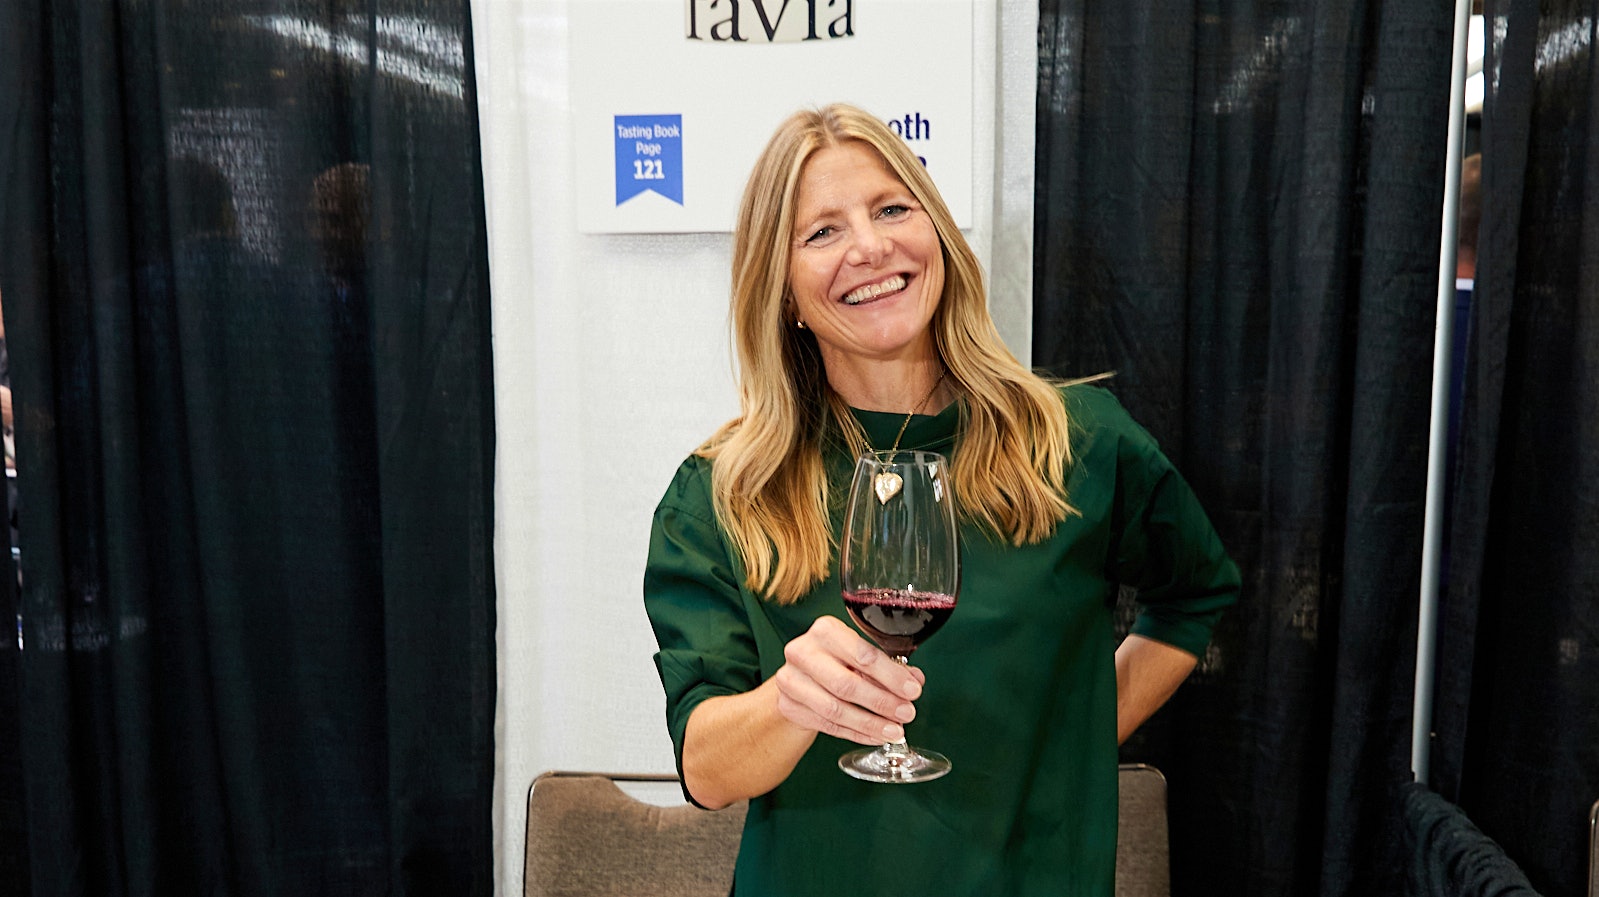  Favia co-founder and viticulturist Annie Favia holding a glass of red wine at the Wine Spectator Grand Tasting